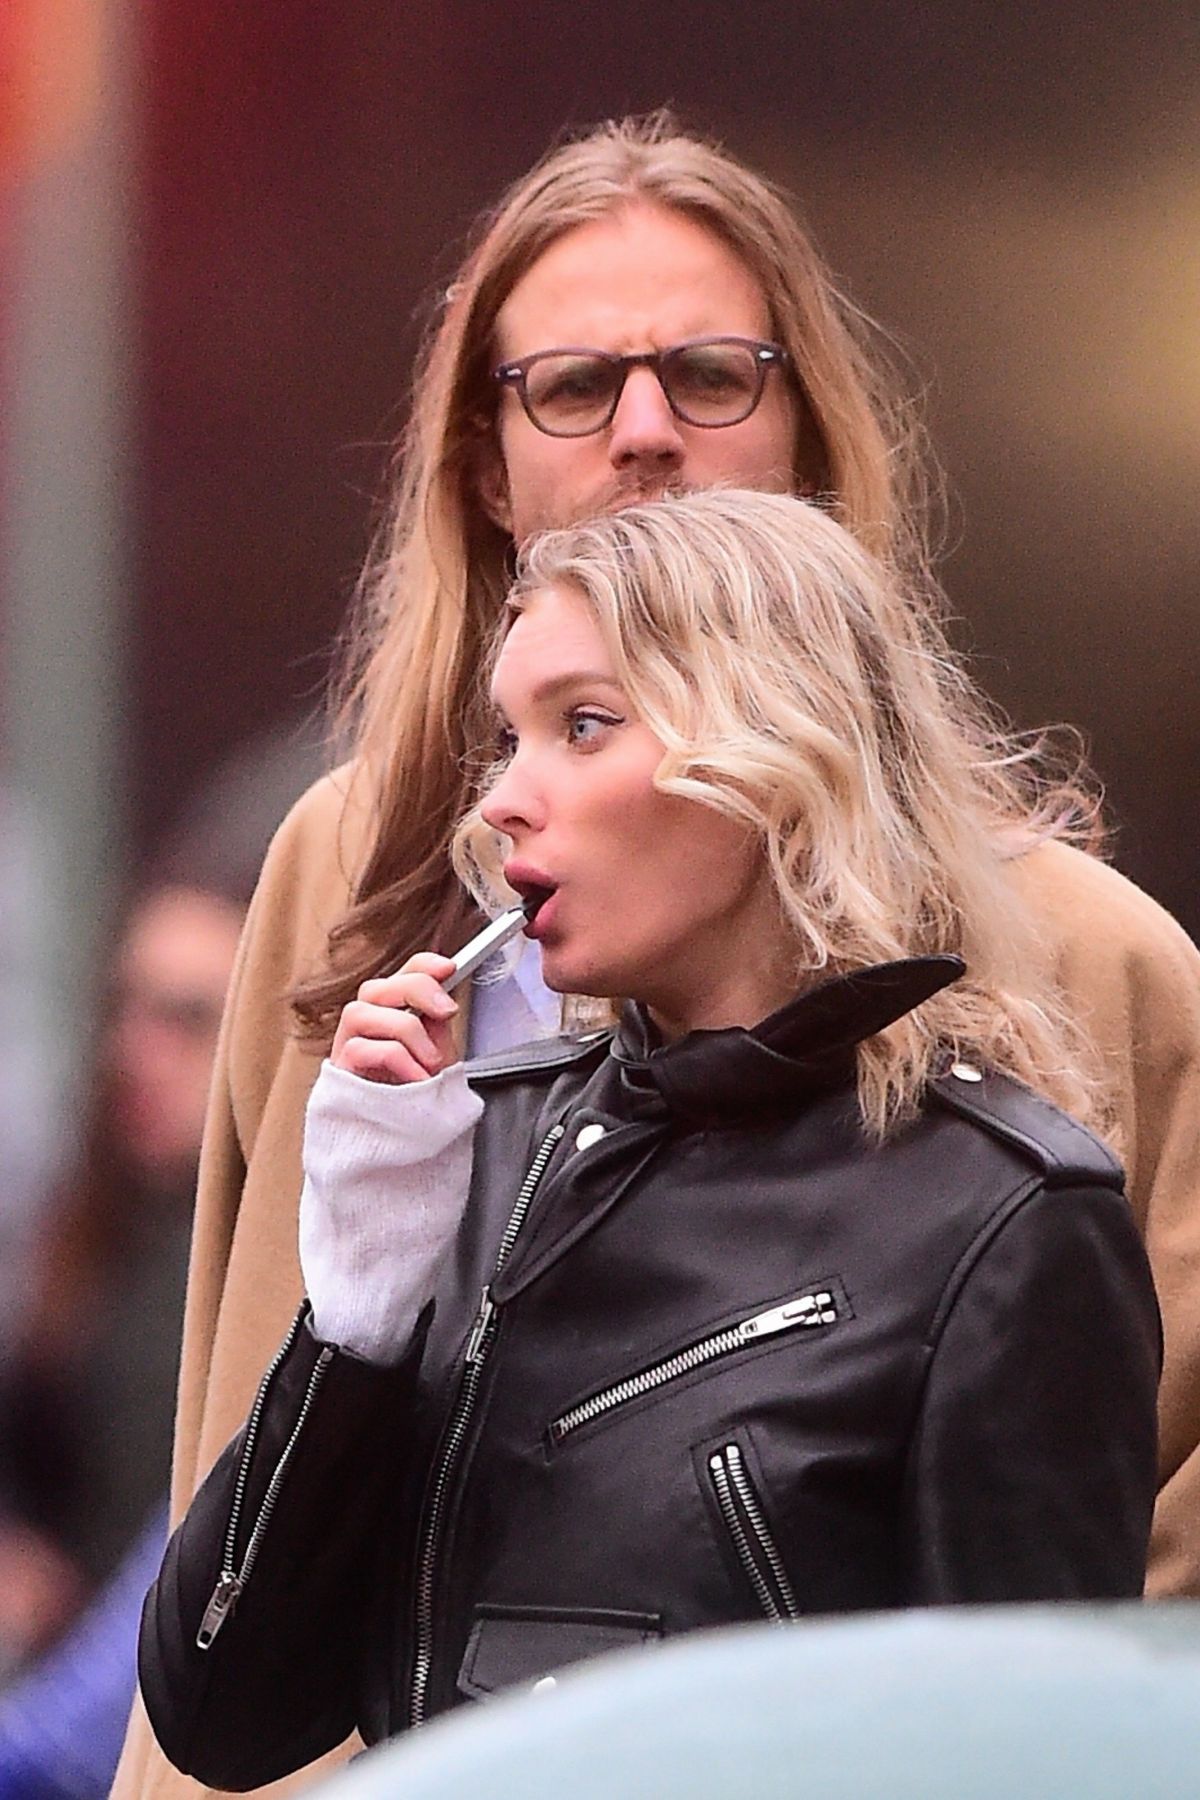 elsa-hosk-and-tom-daly-out-in-new-york-04-16-2019-0.jpg